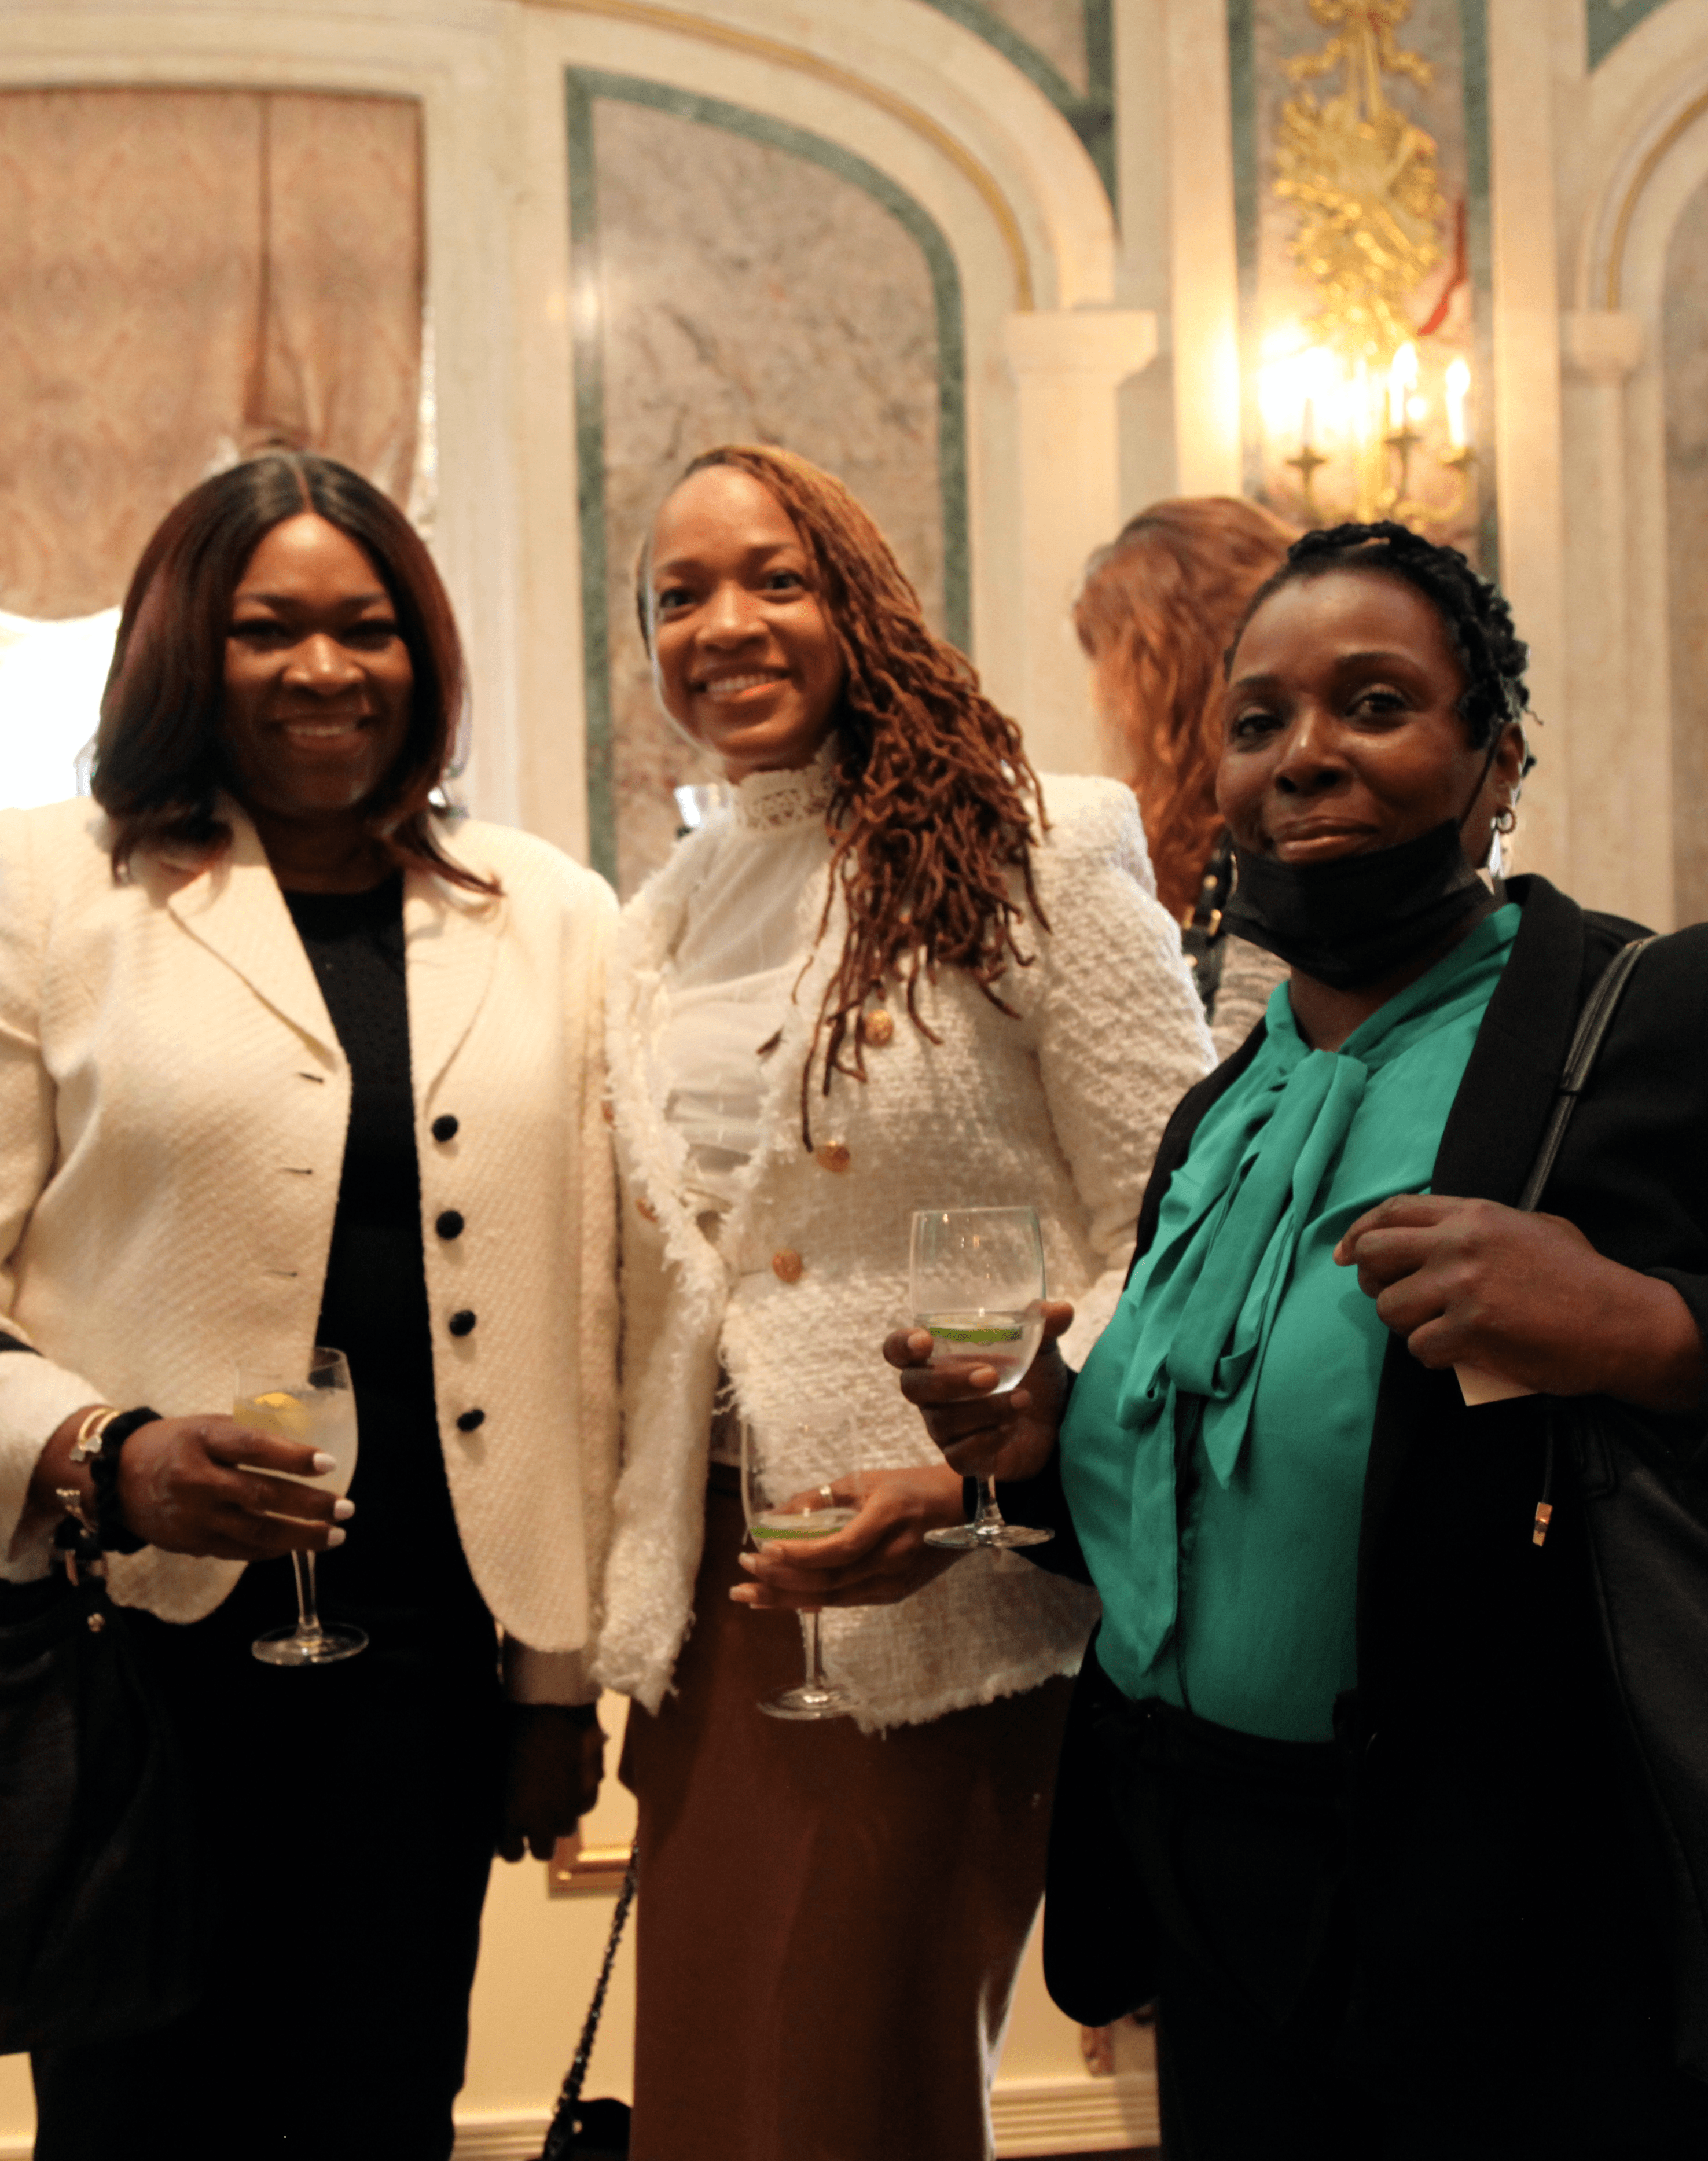 Three women stand in the lobby of the Plaza Hotel's Grand Ballroom and smile at the camera.